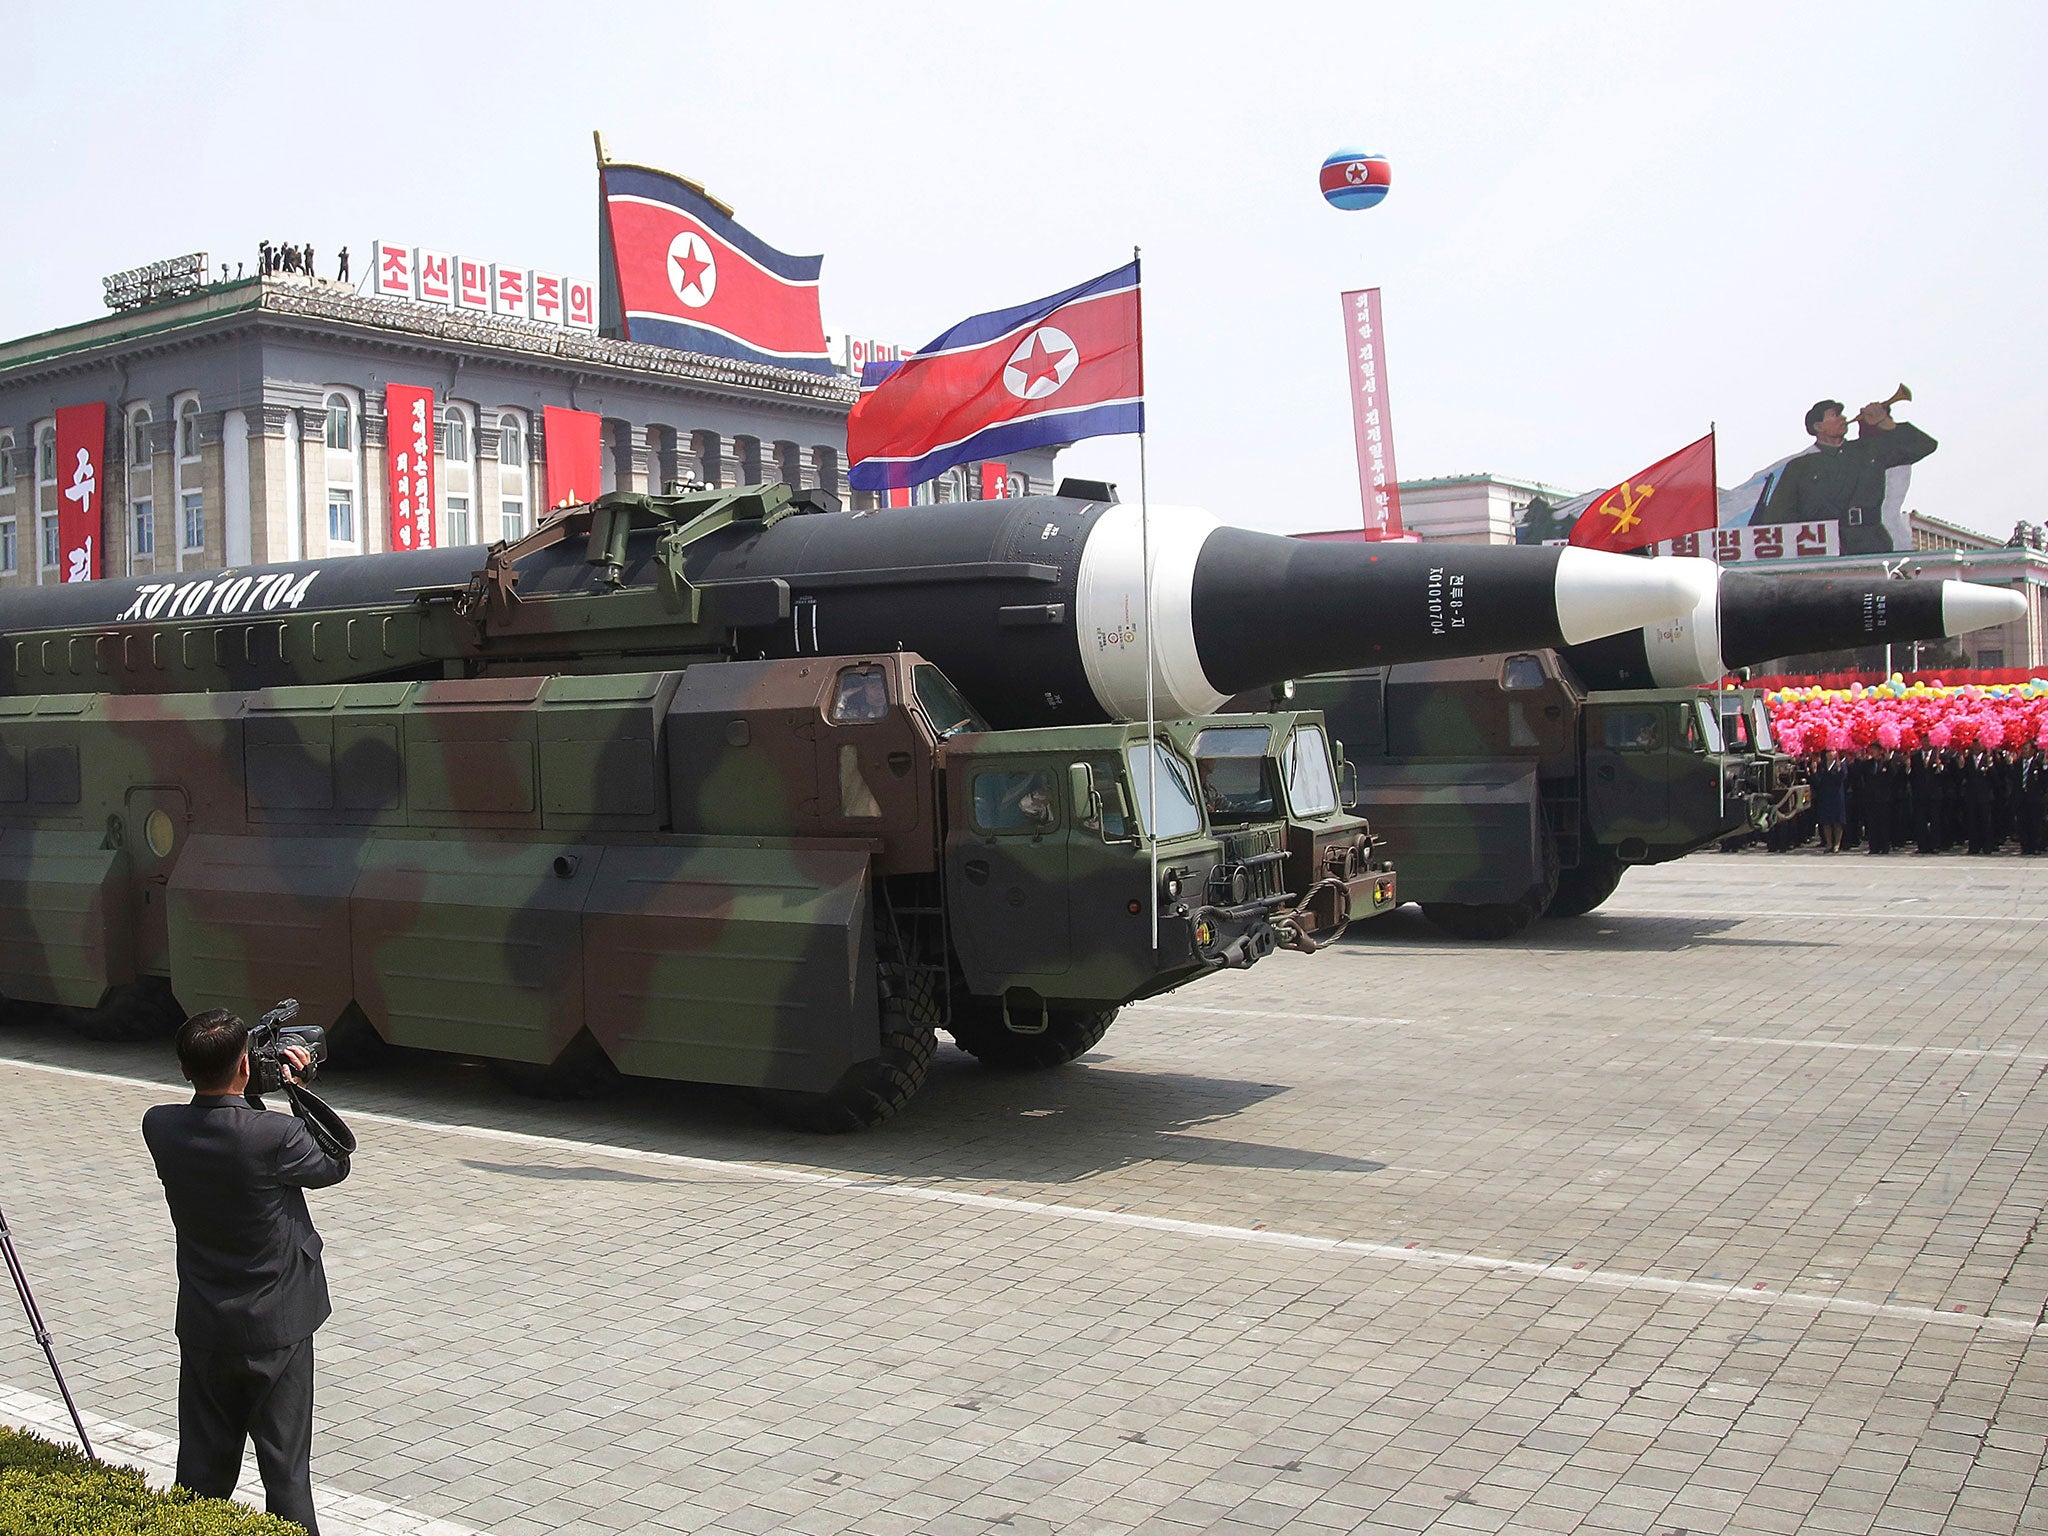 What military experts say appears to be a North Korean KN-08 inter-continental ballistic missile is paraded across Kim Il Sung Square during a military parade on 15 April